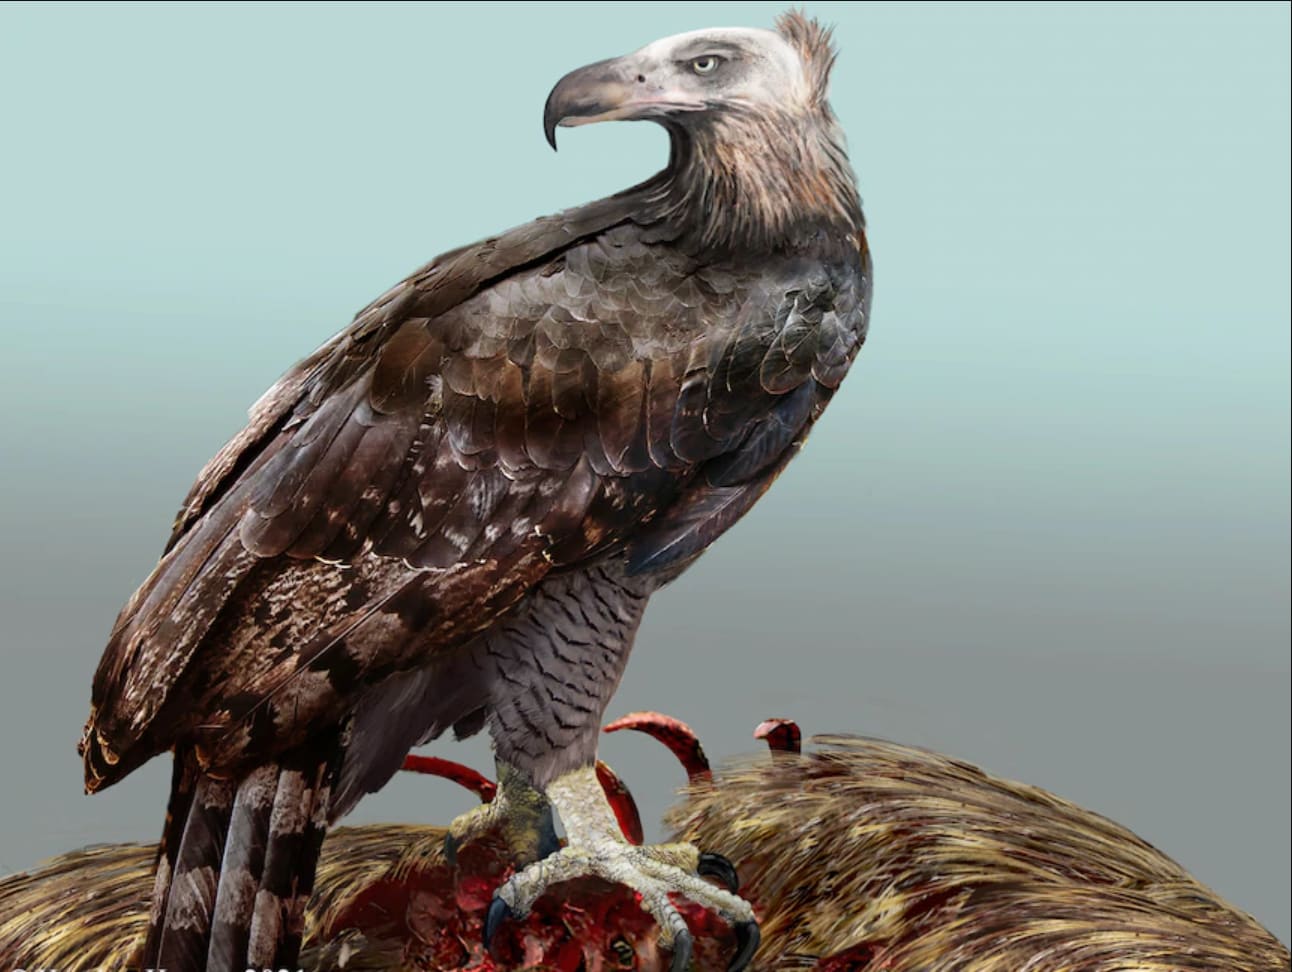 The New Zealand's Haast Eagle, the largest to ever lived is believed to have had a bald head like a vulture , based on recent research and Maori petroglyphs.